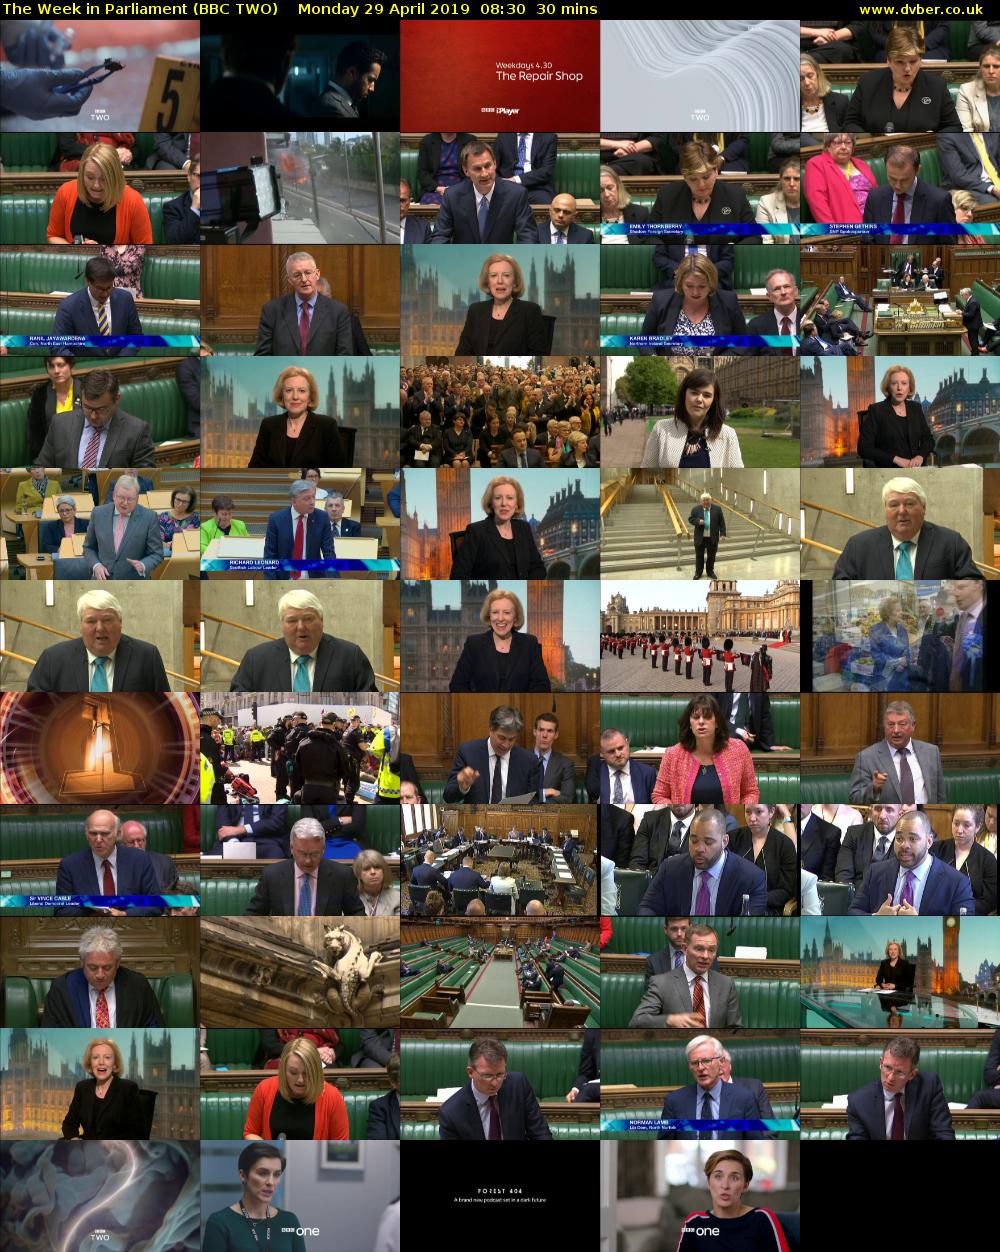 The Week in Parliament (BBC TWO) Monday 29 April 2019 08:30 - 09:00